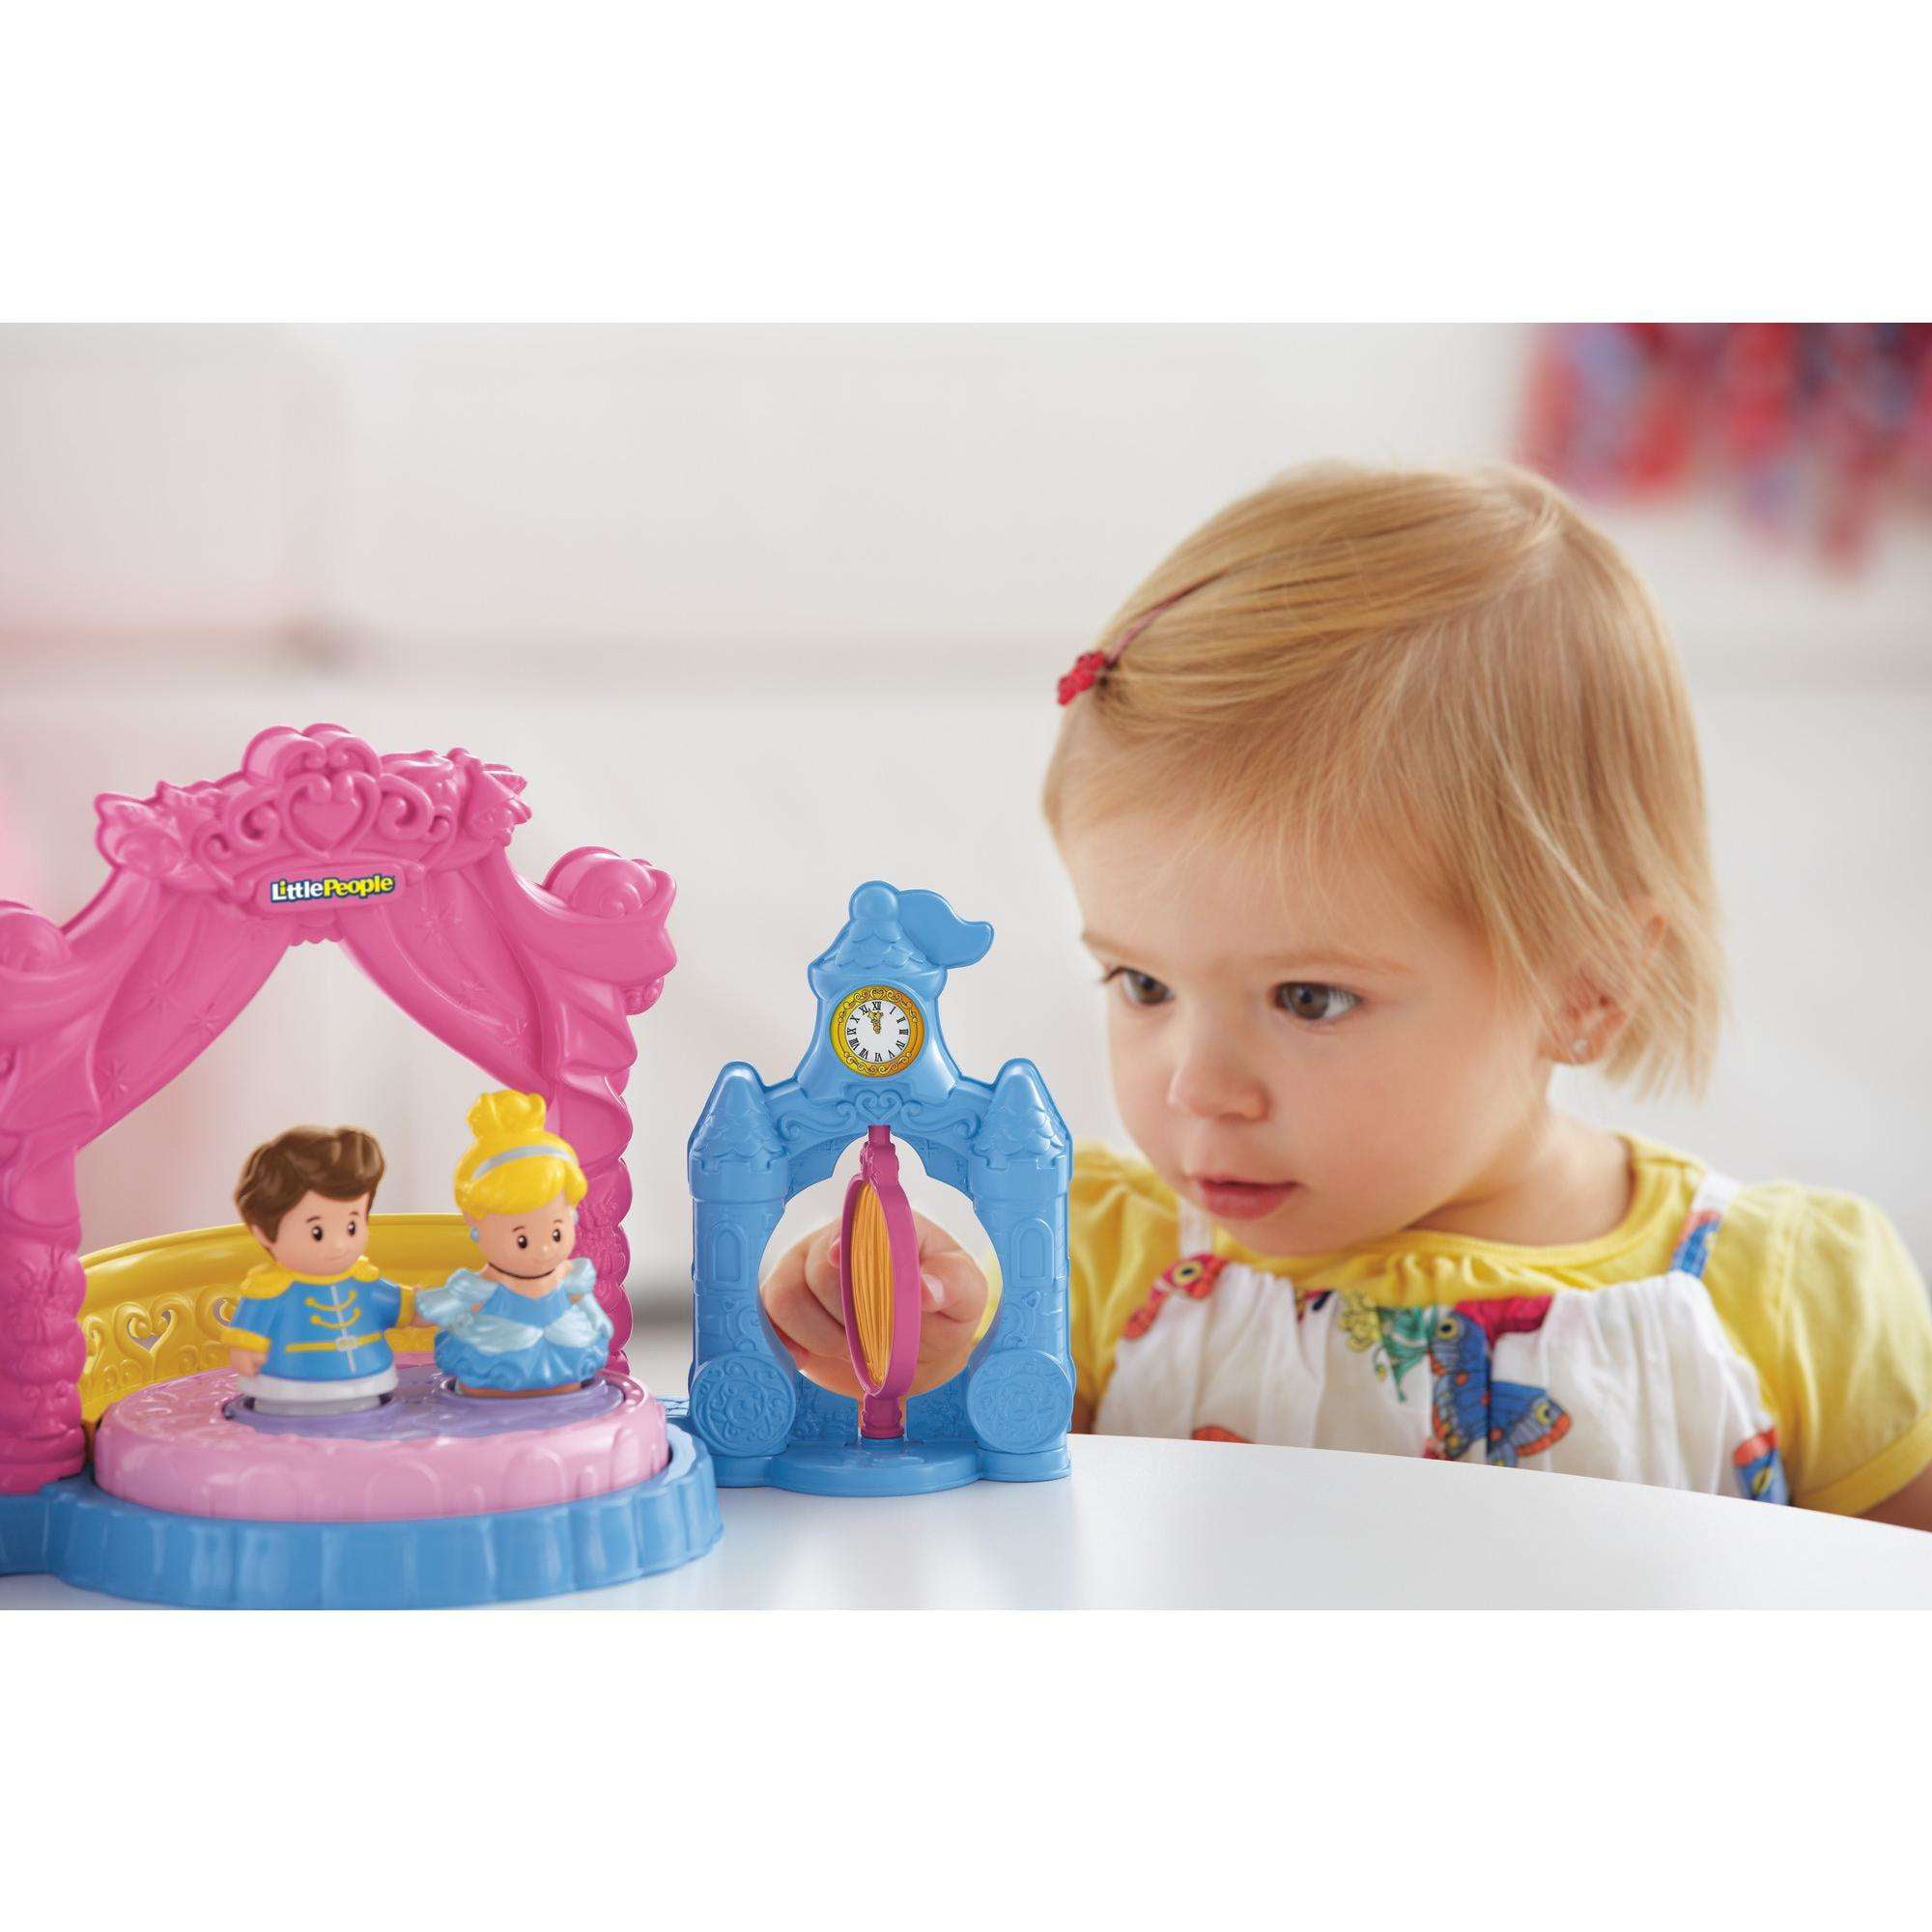 Disney Princess Cinderella's Ball by Little People for sale online Fisher 